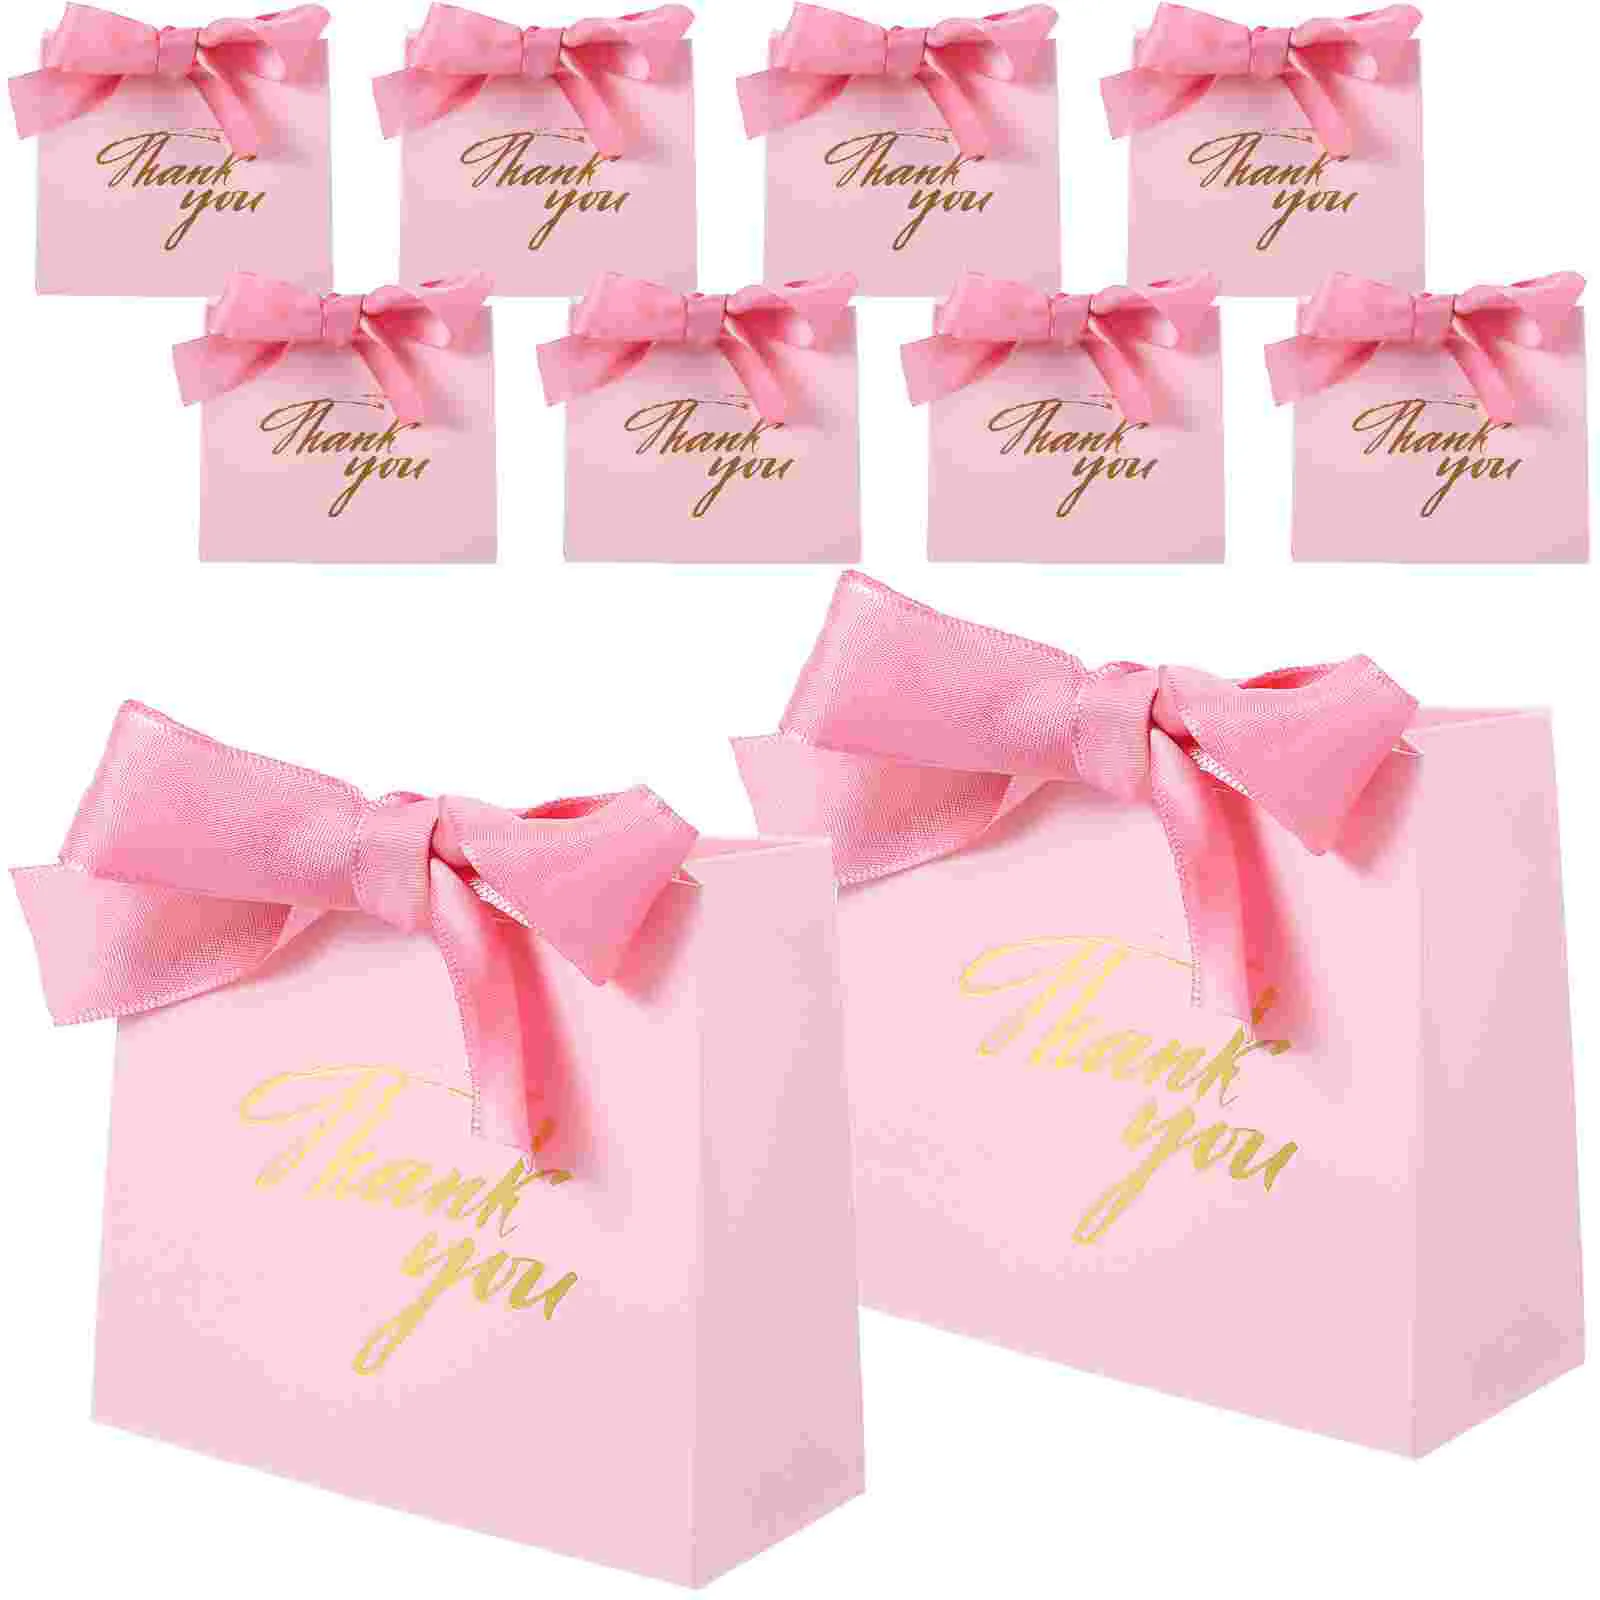 

10 Pcs Paper Bags Small Gift Wrapping Sealable for Packaging Thank You Favors Packing